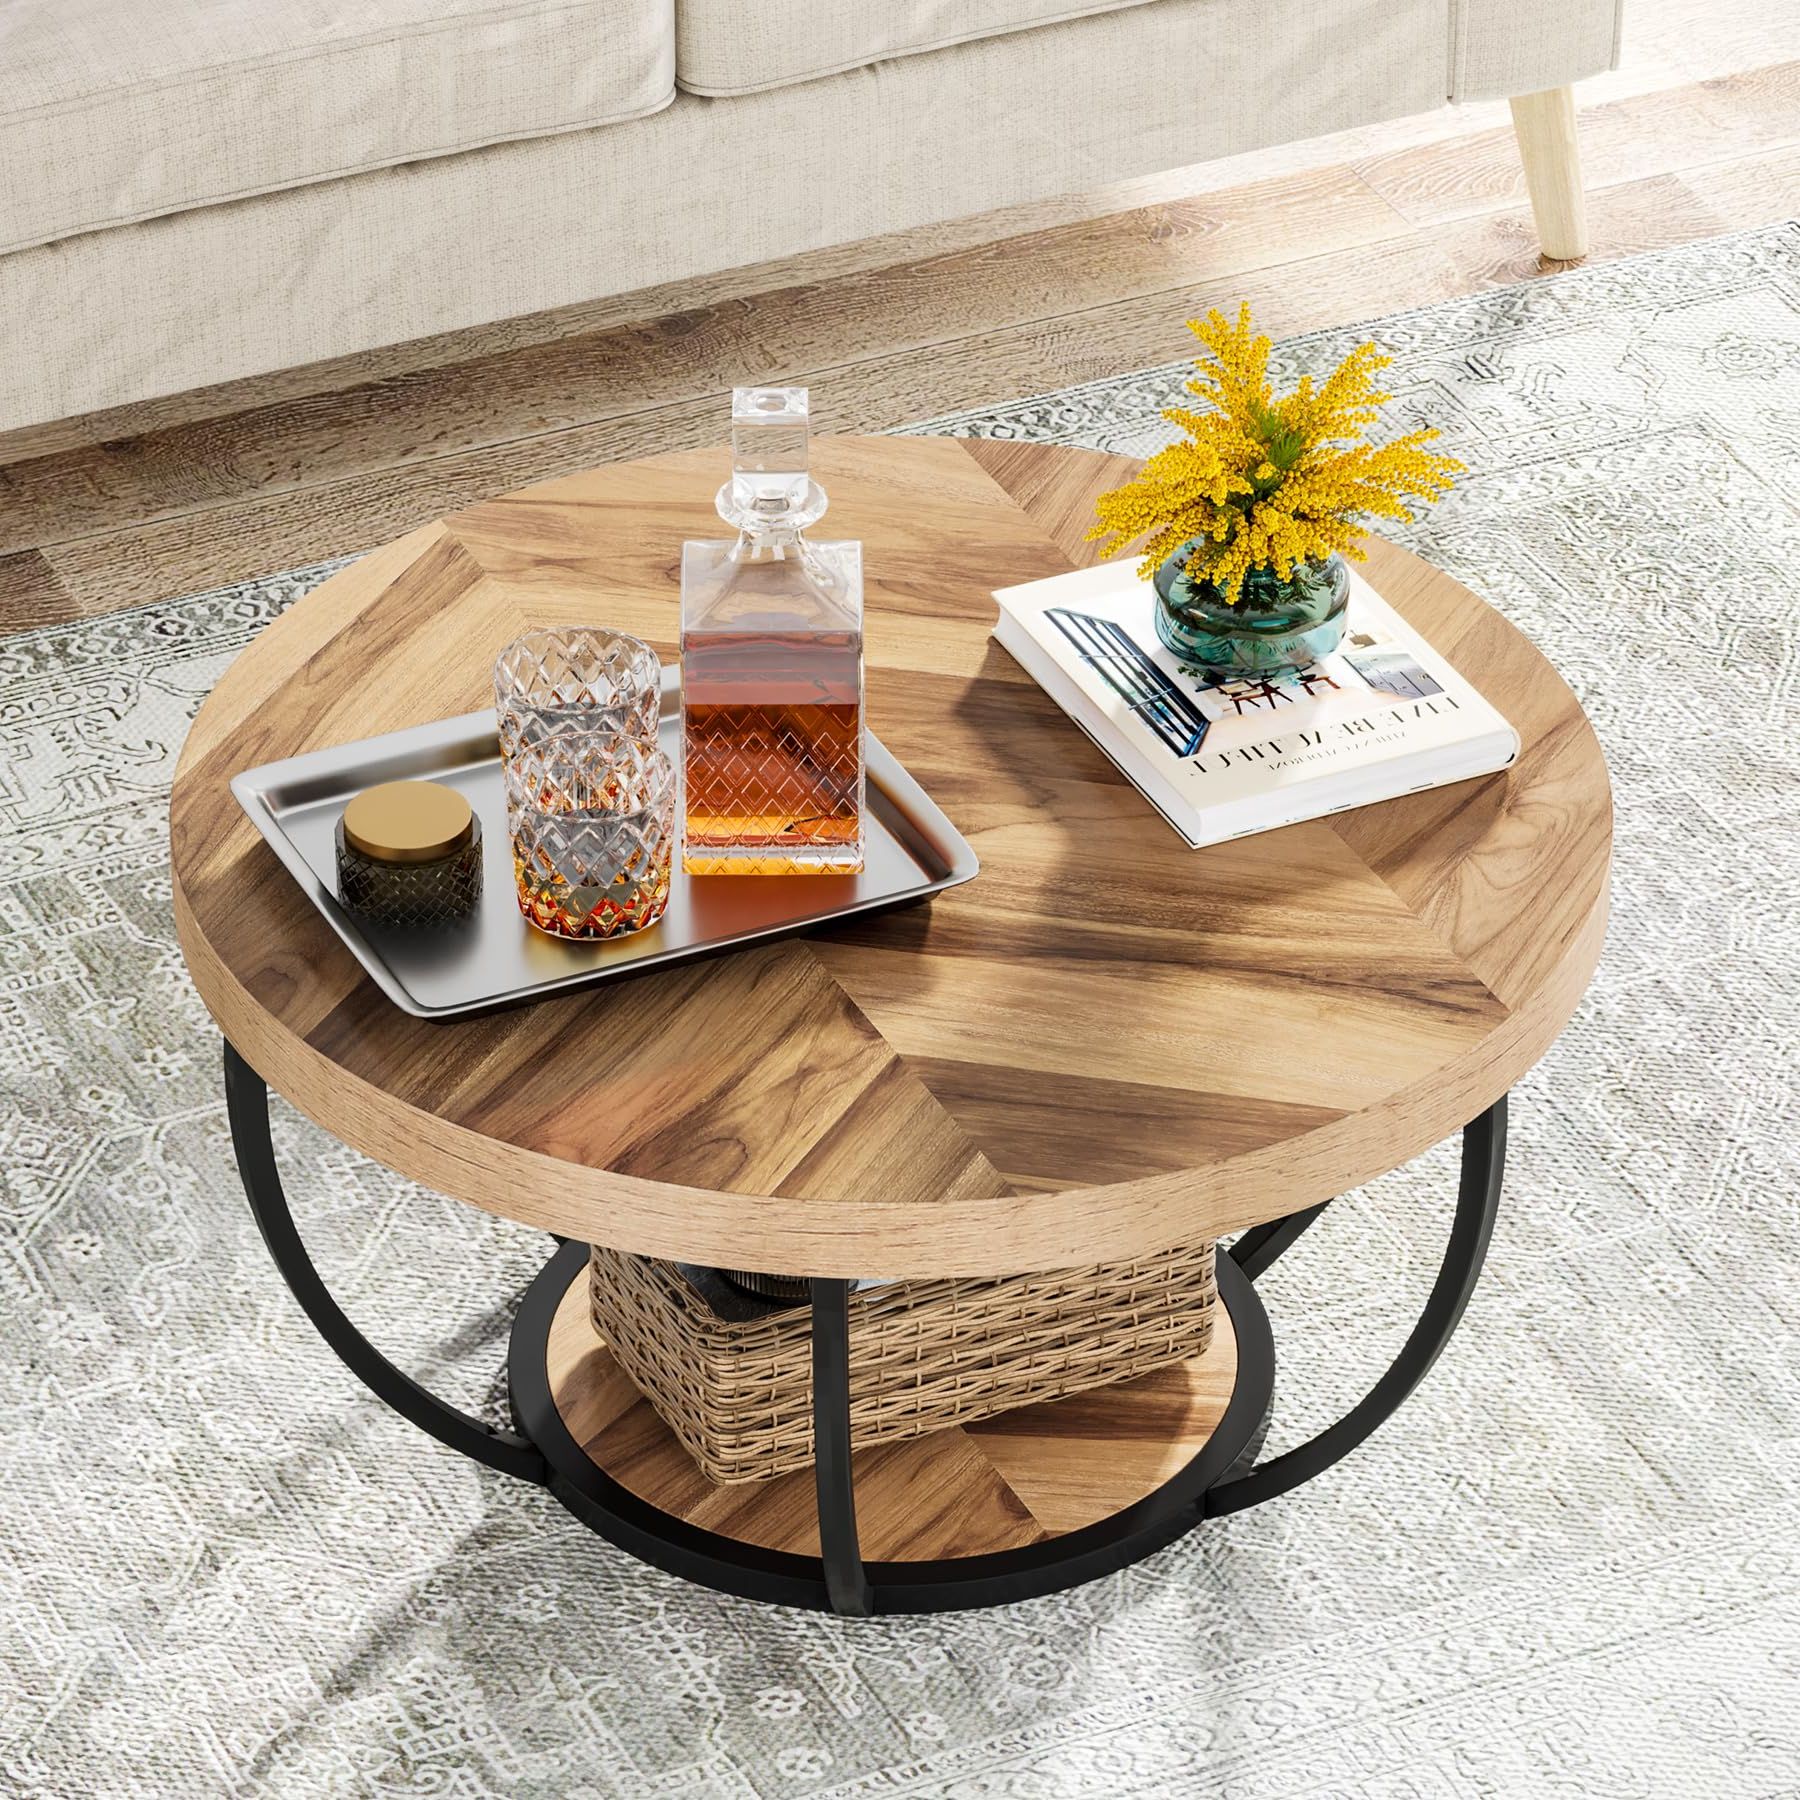 Most Current Amazon: Tribesigns Round Coffee Table, Modern 2 Tier Center Table With  Storage Open Shelves, Wooden Circle Coffee Table Sofa Side Table With Metal  Legs For Living Room, Wooden Grain And Black : Home Throughout Wood Coffee Tables With 2 Tier Storage (Photo 3 of 10)